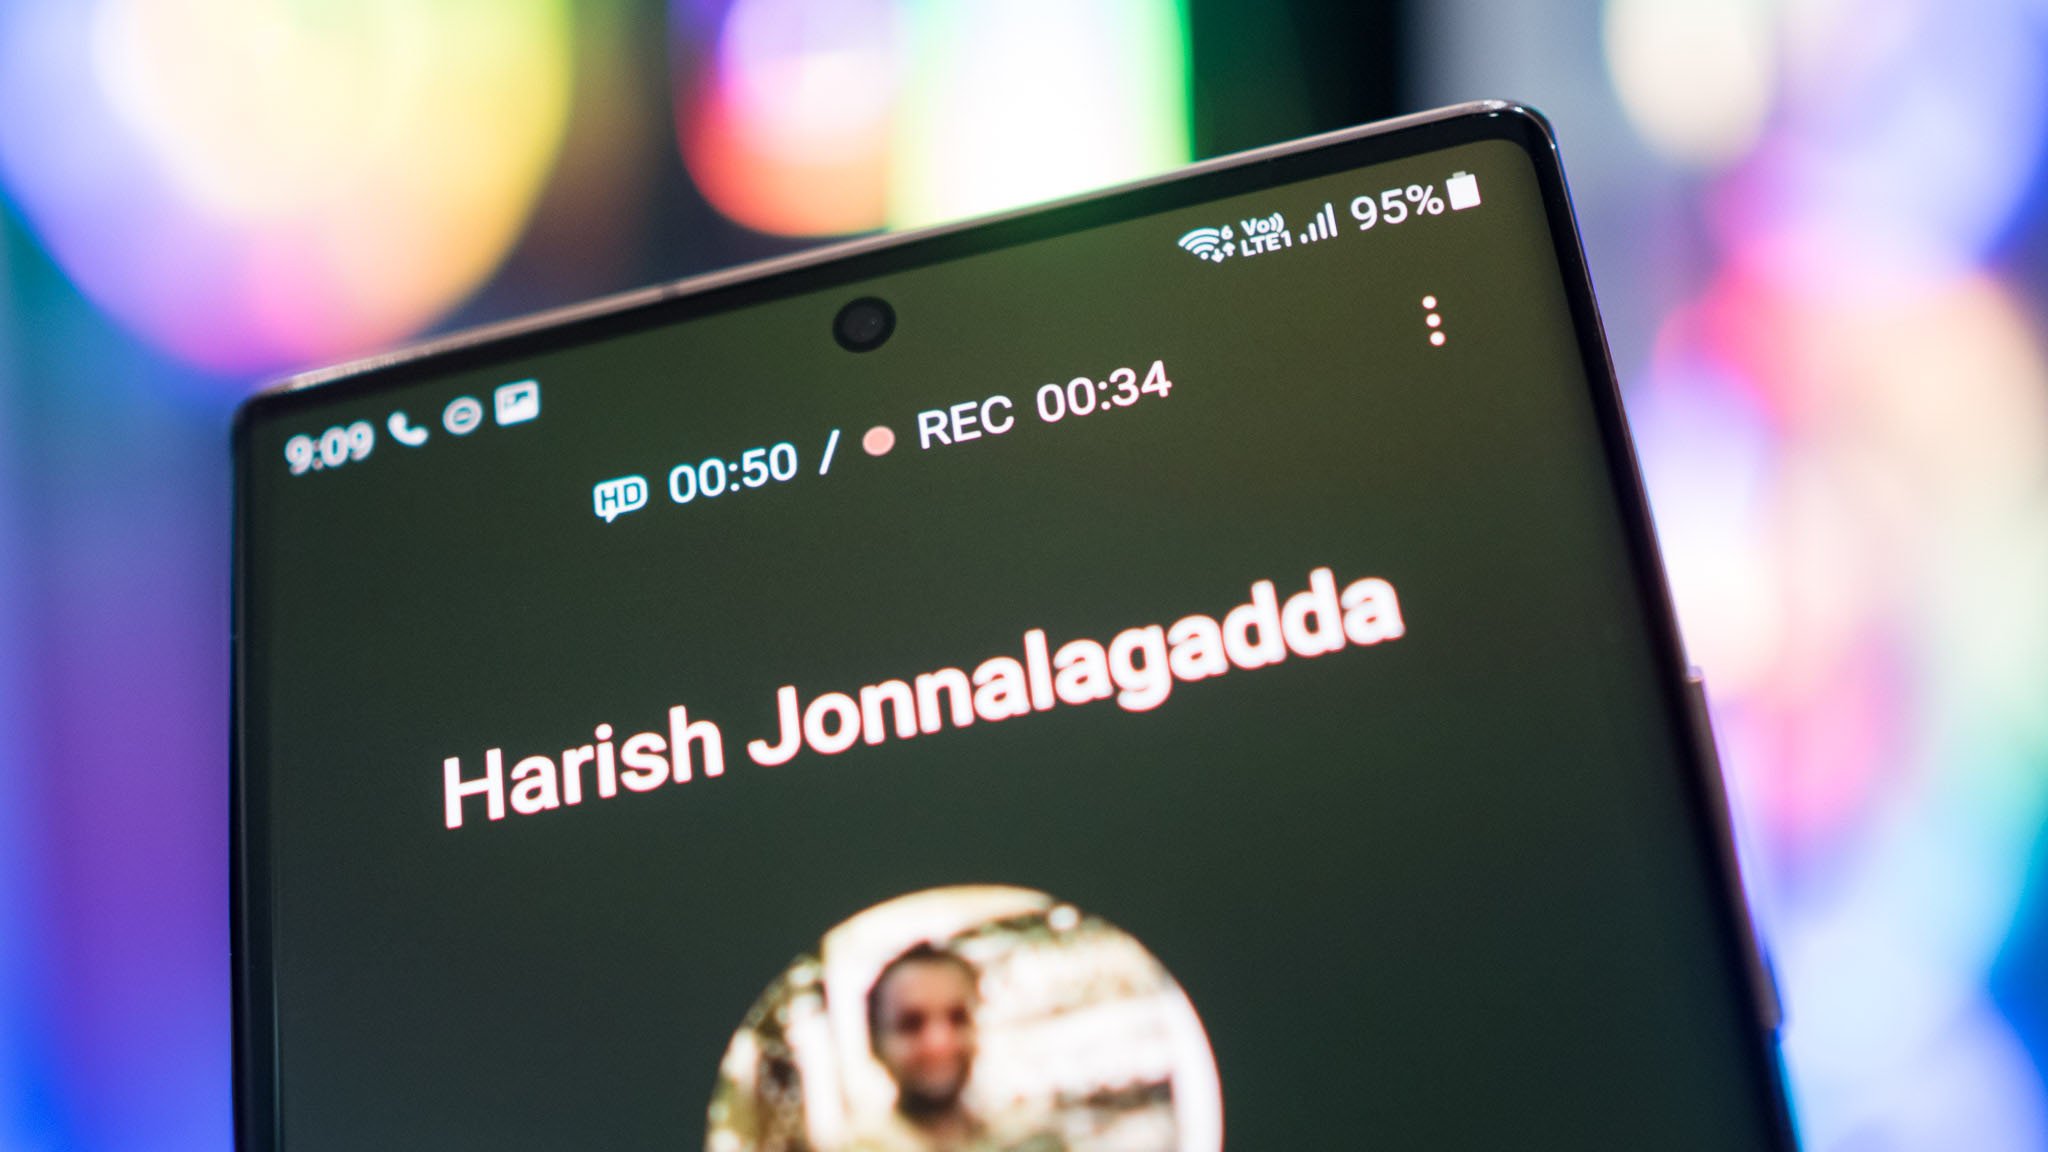 How to record calls on Android